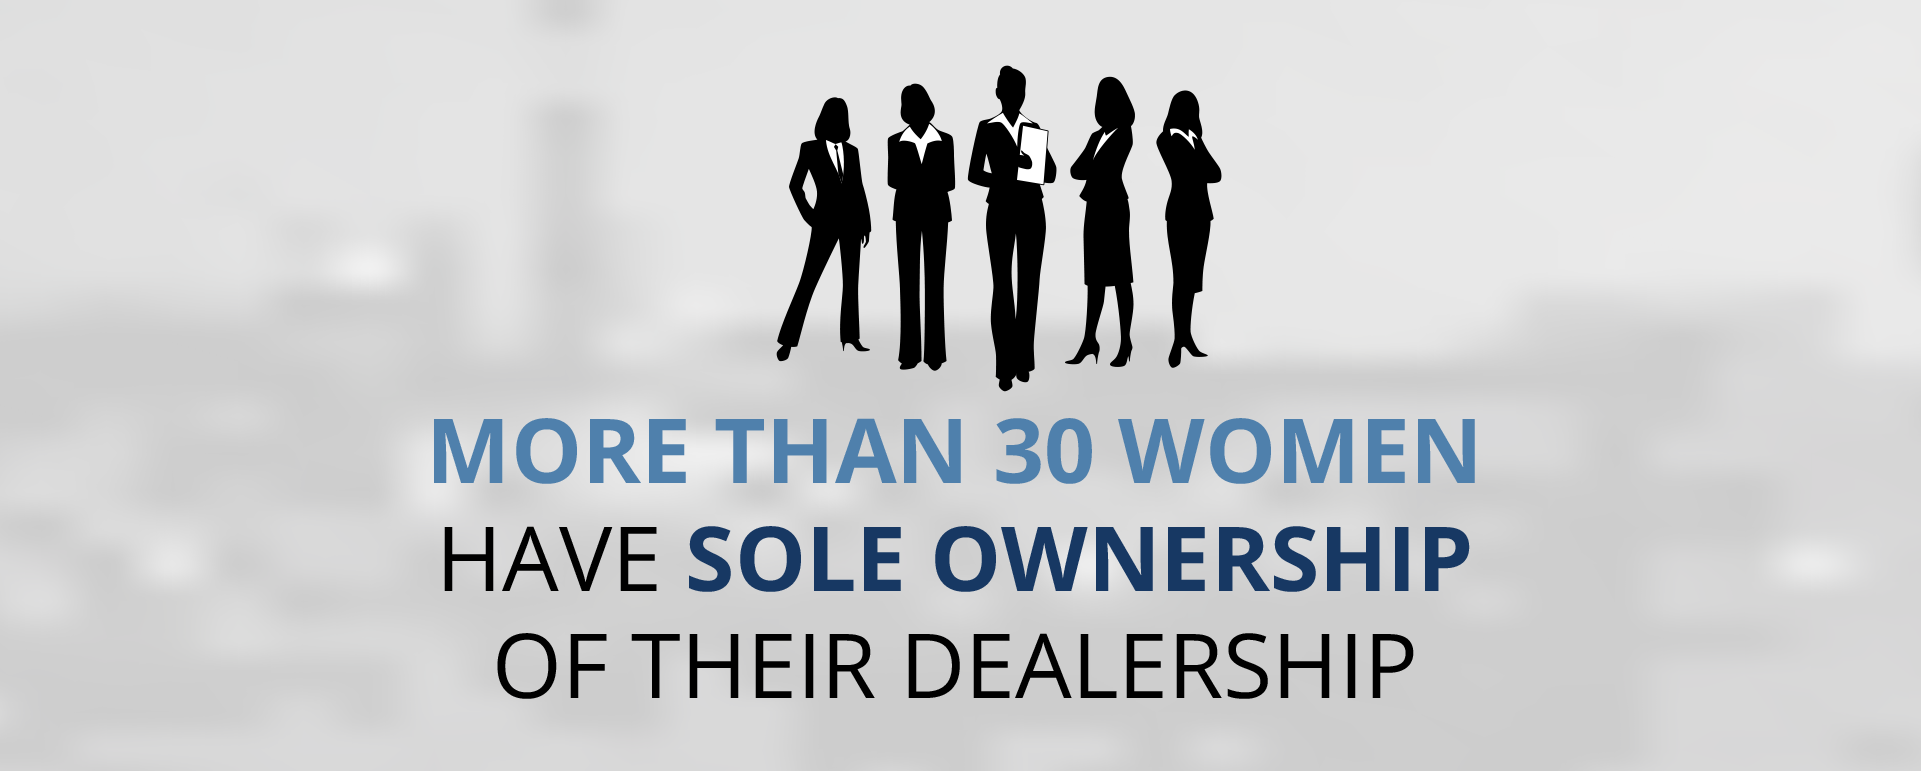 More than 30 women have majority ownership of their dealership